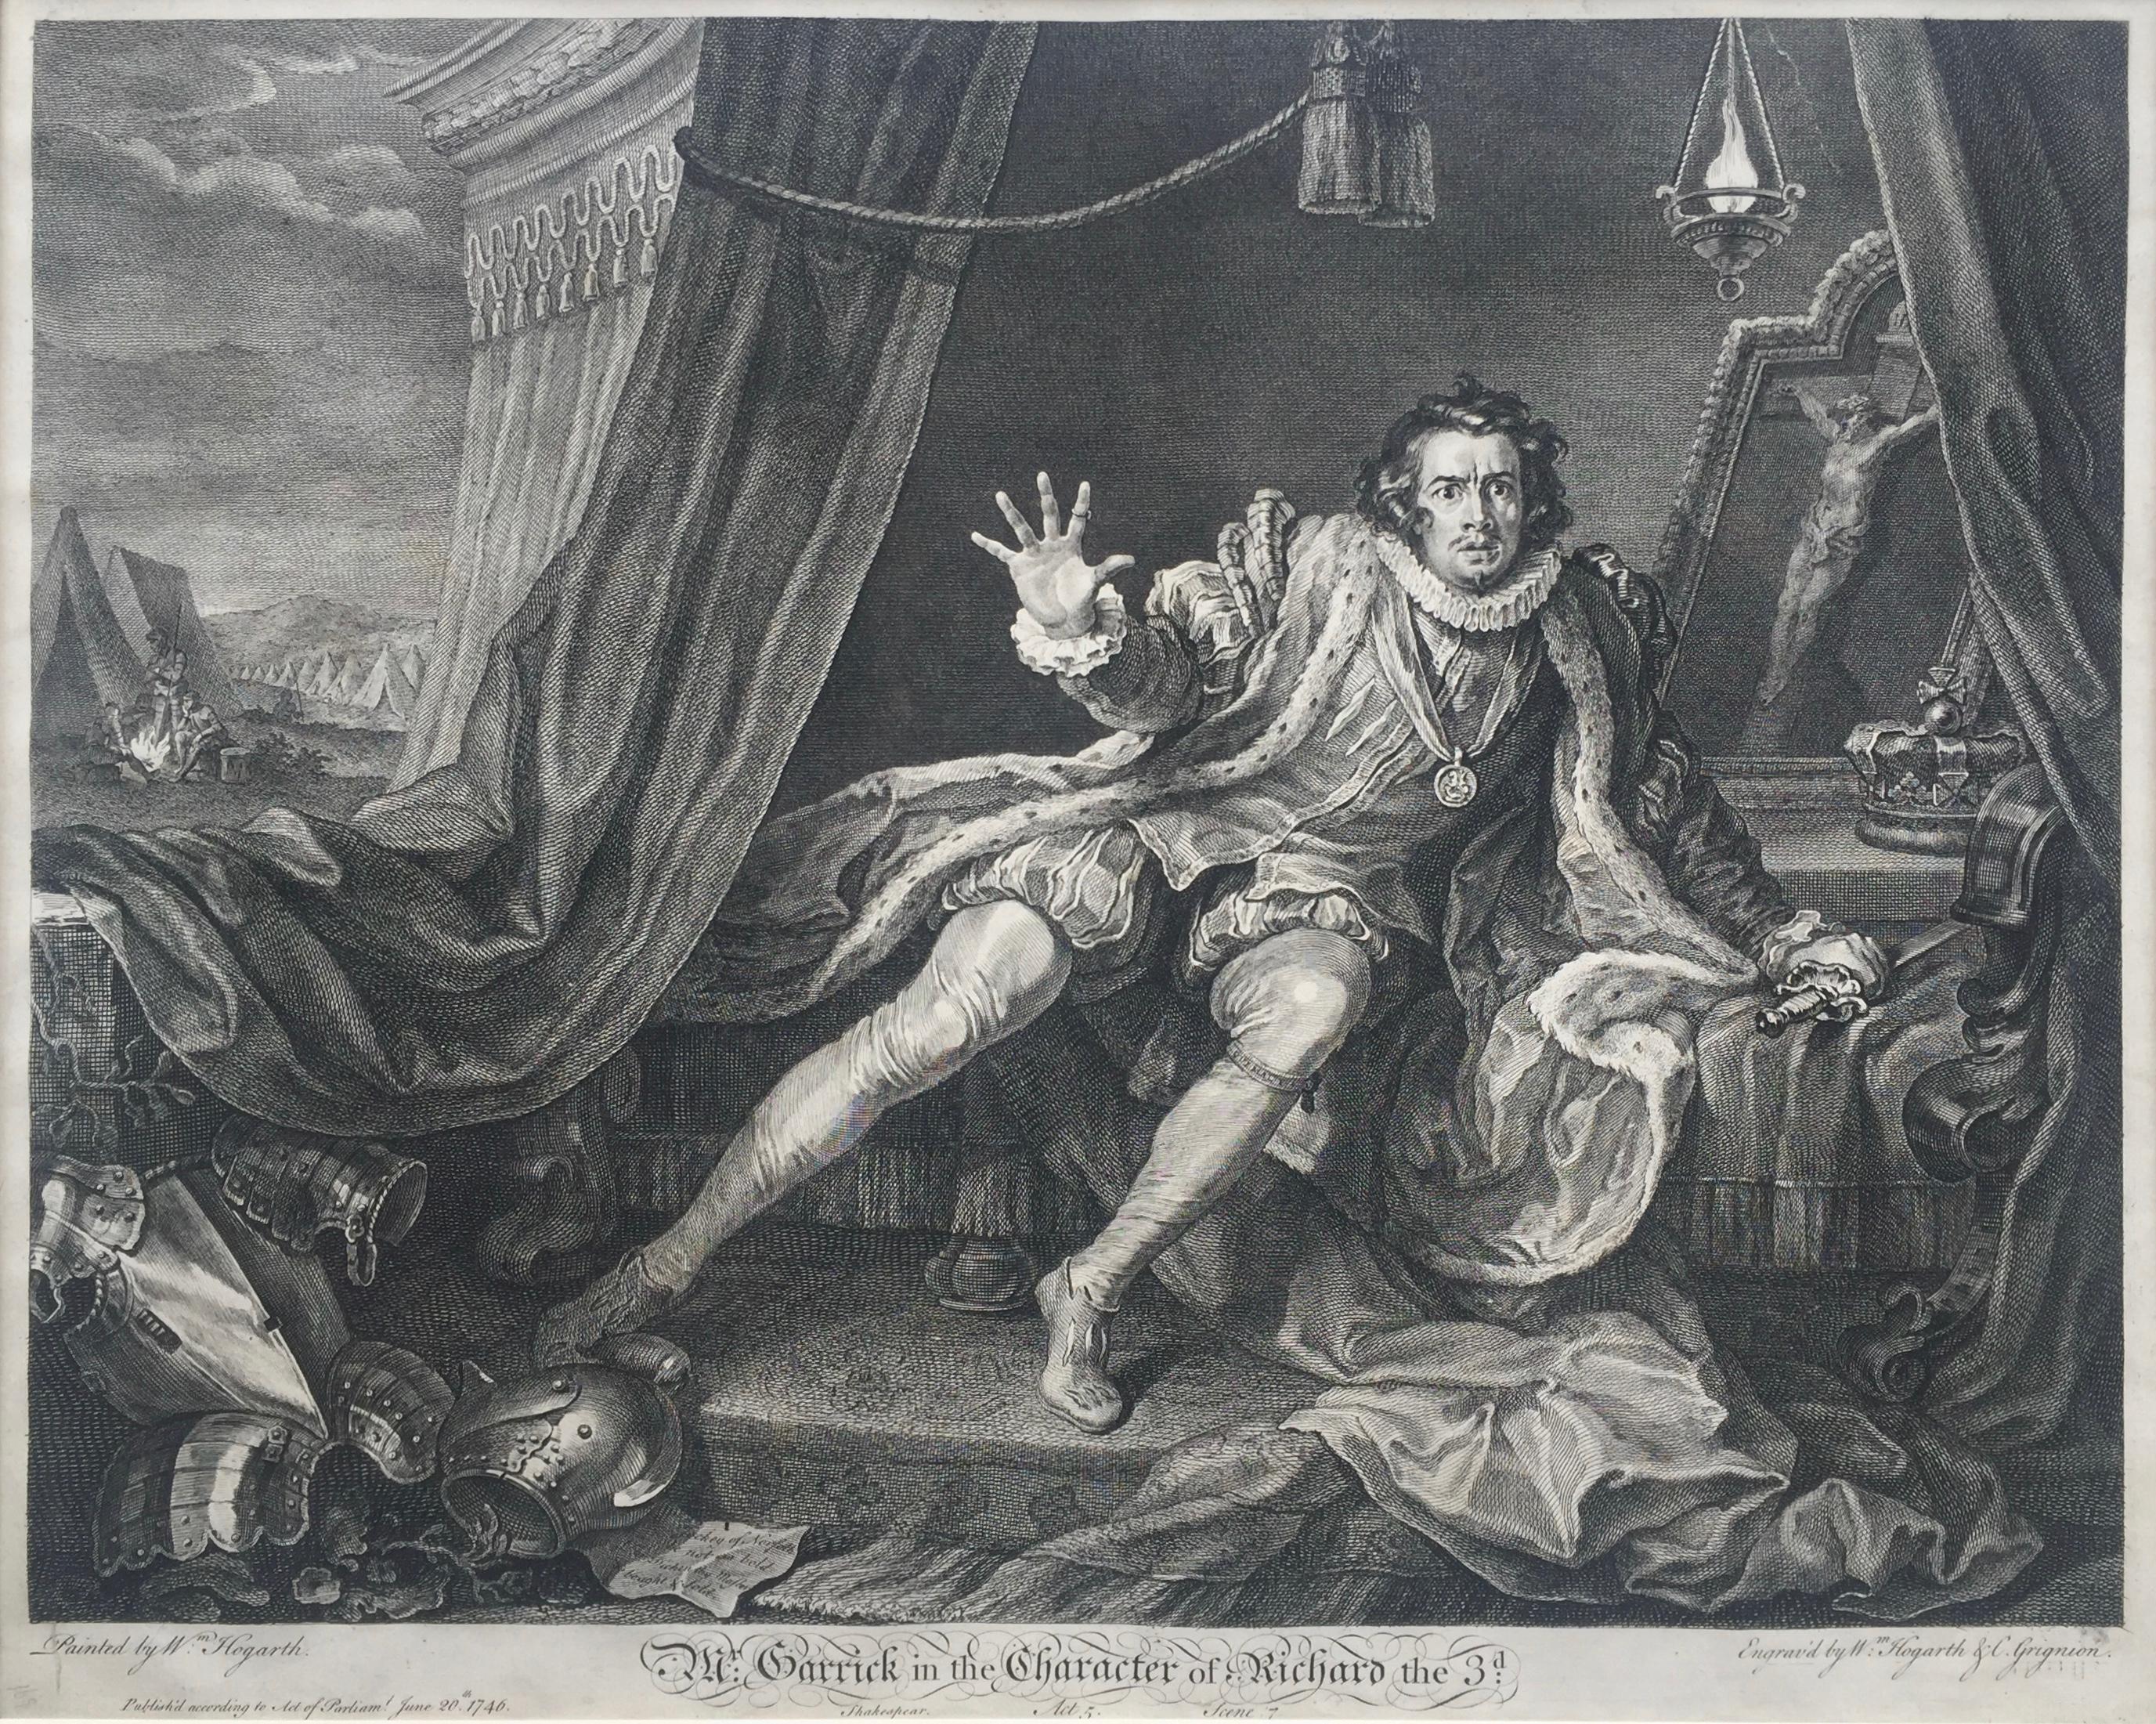 Mr. Garrick in the Character of Richard the 3rd  - FINE IMPRESSION